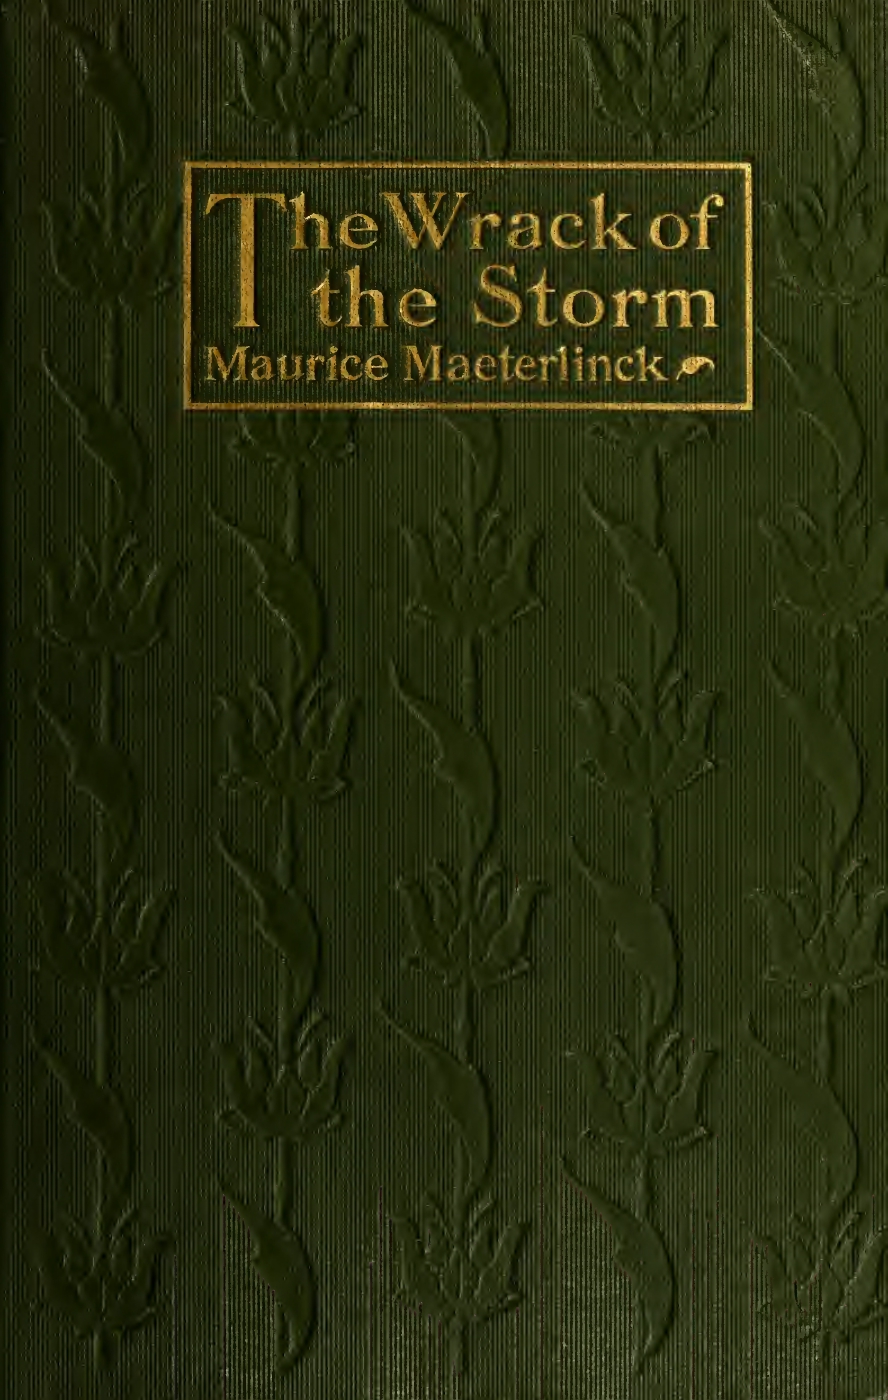 Maurice Maeterlinck, The Wrack of the Storm, cover design by Kahlil Gibran, New York: Dodd, Mead and Co., 1916.